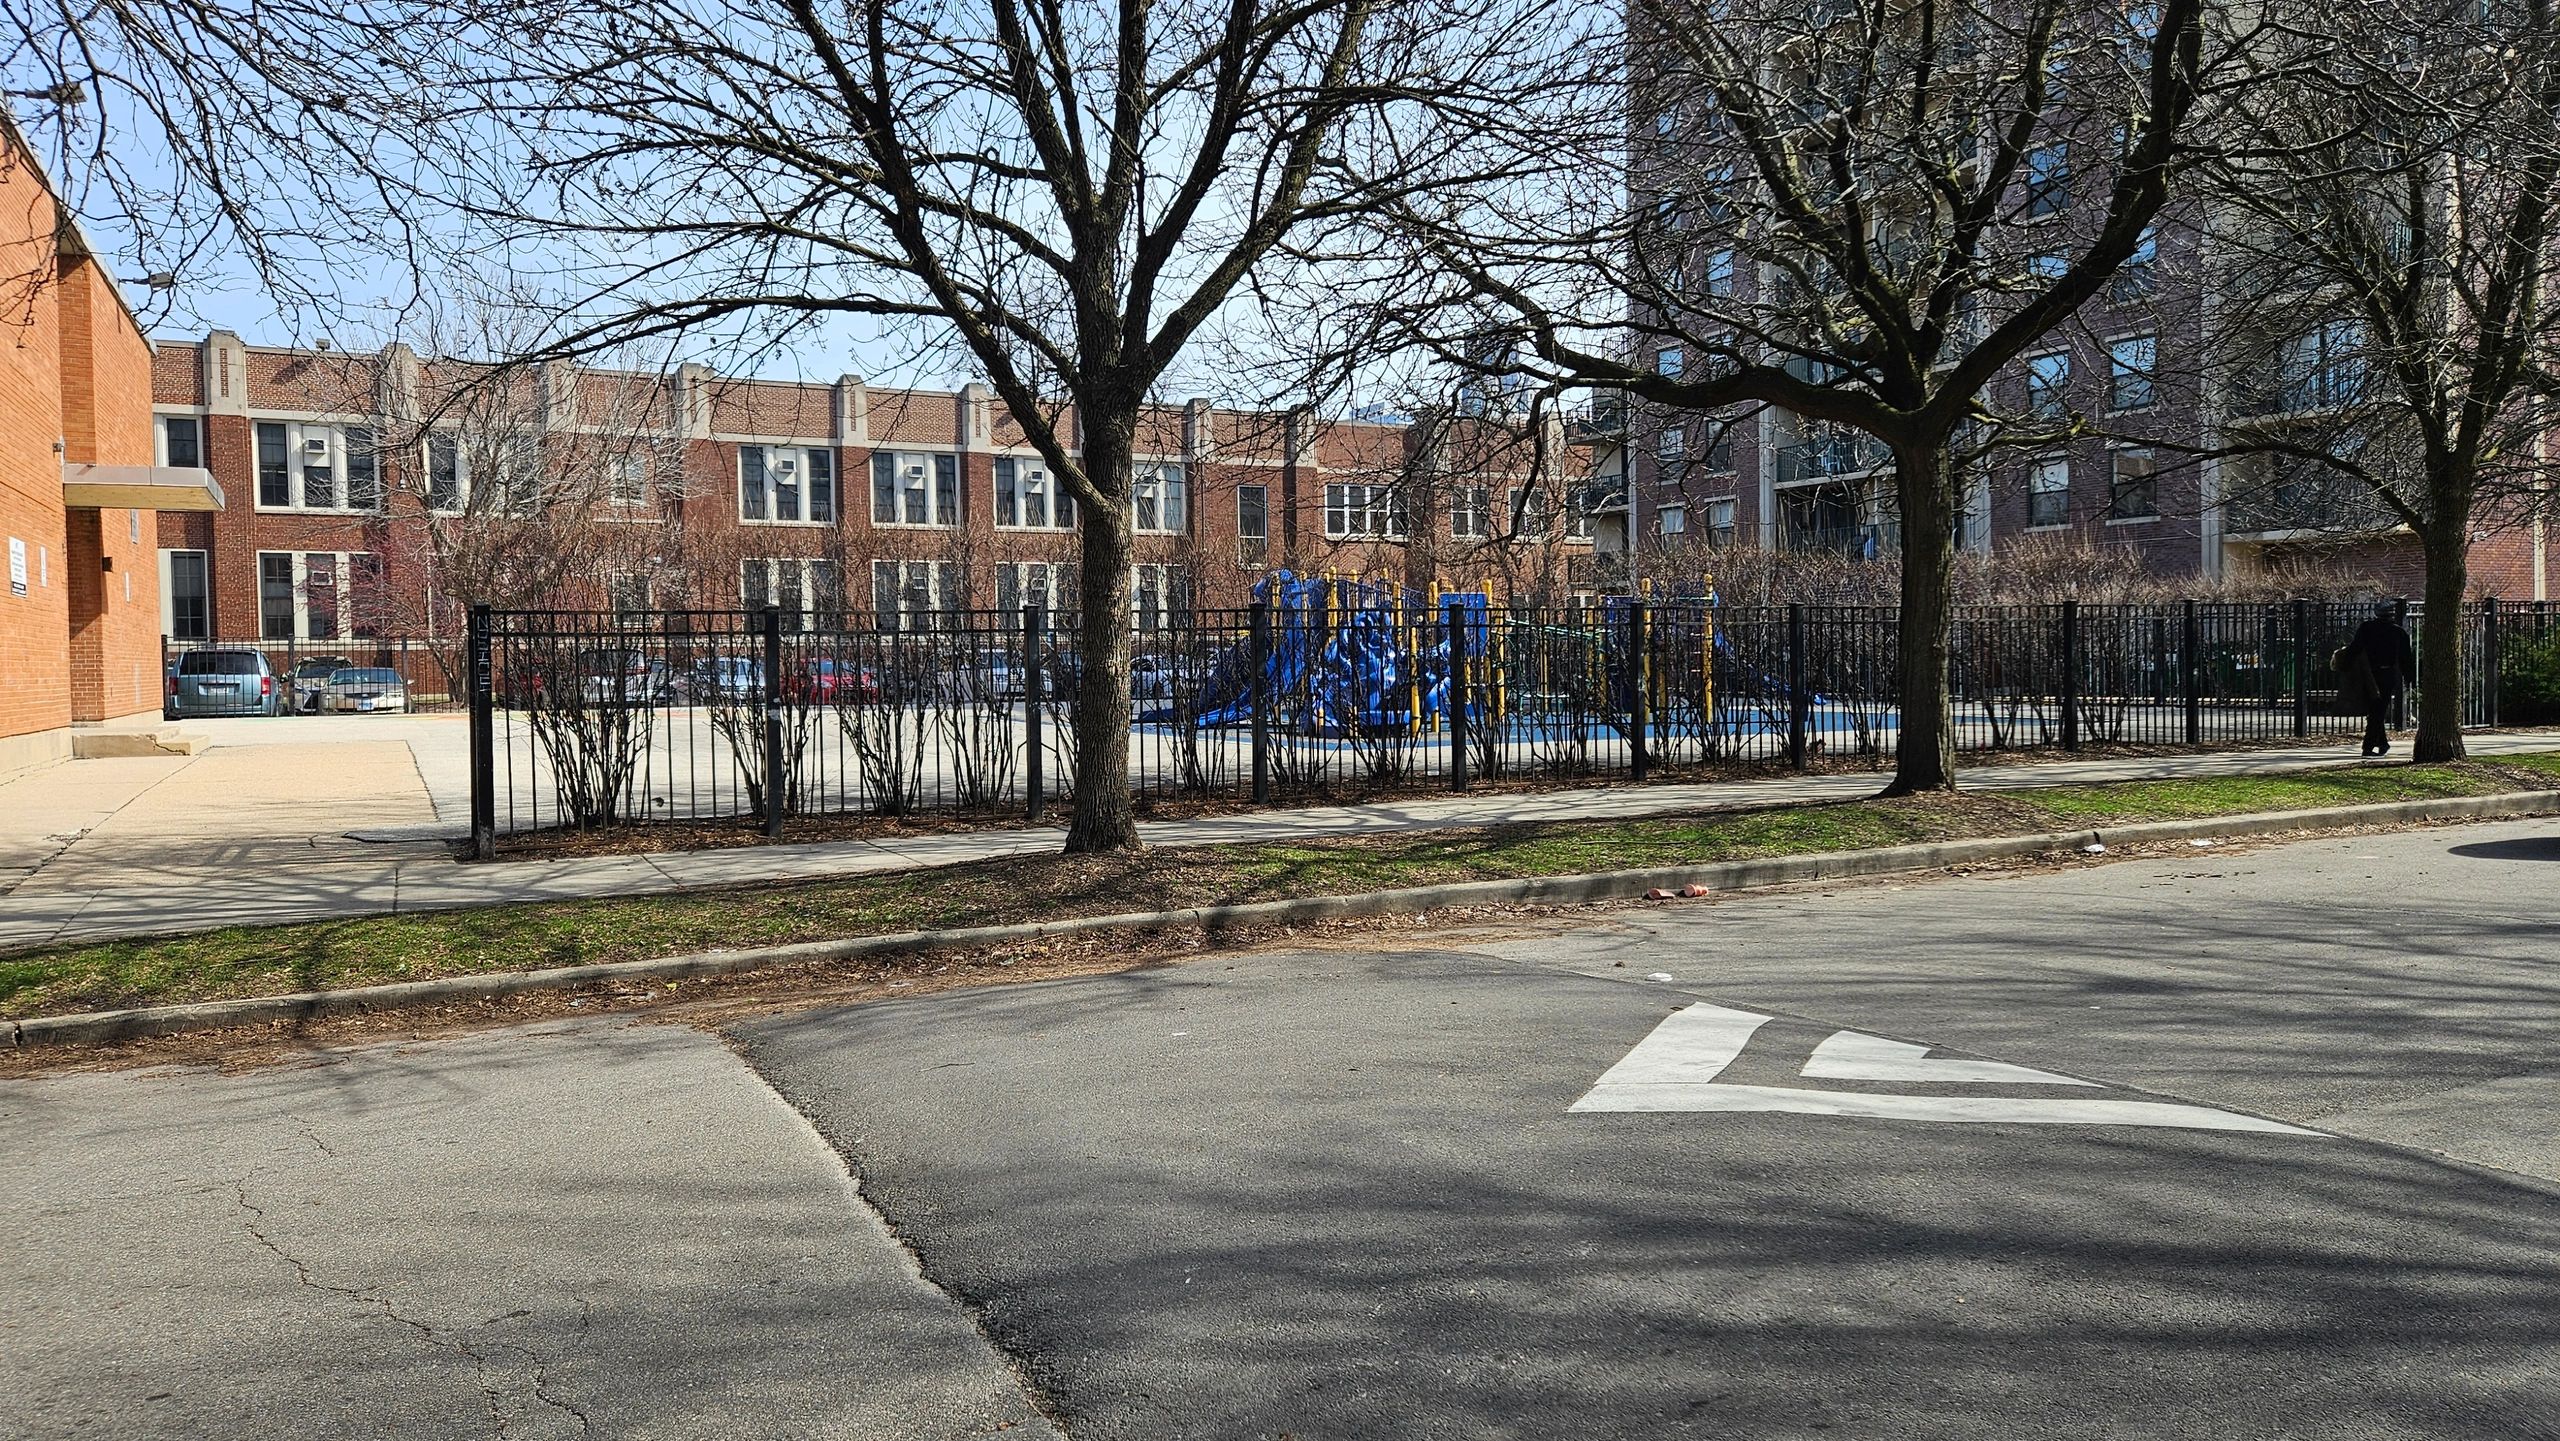 French bilingual school in Old Town neighborhood, Chicago